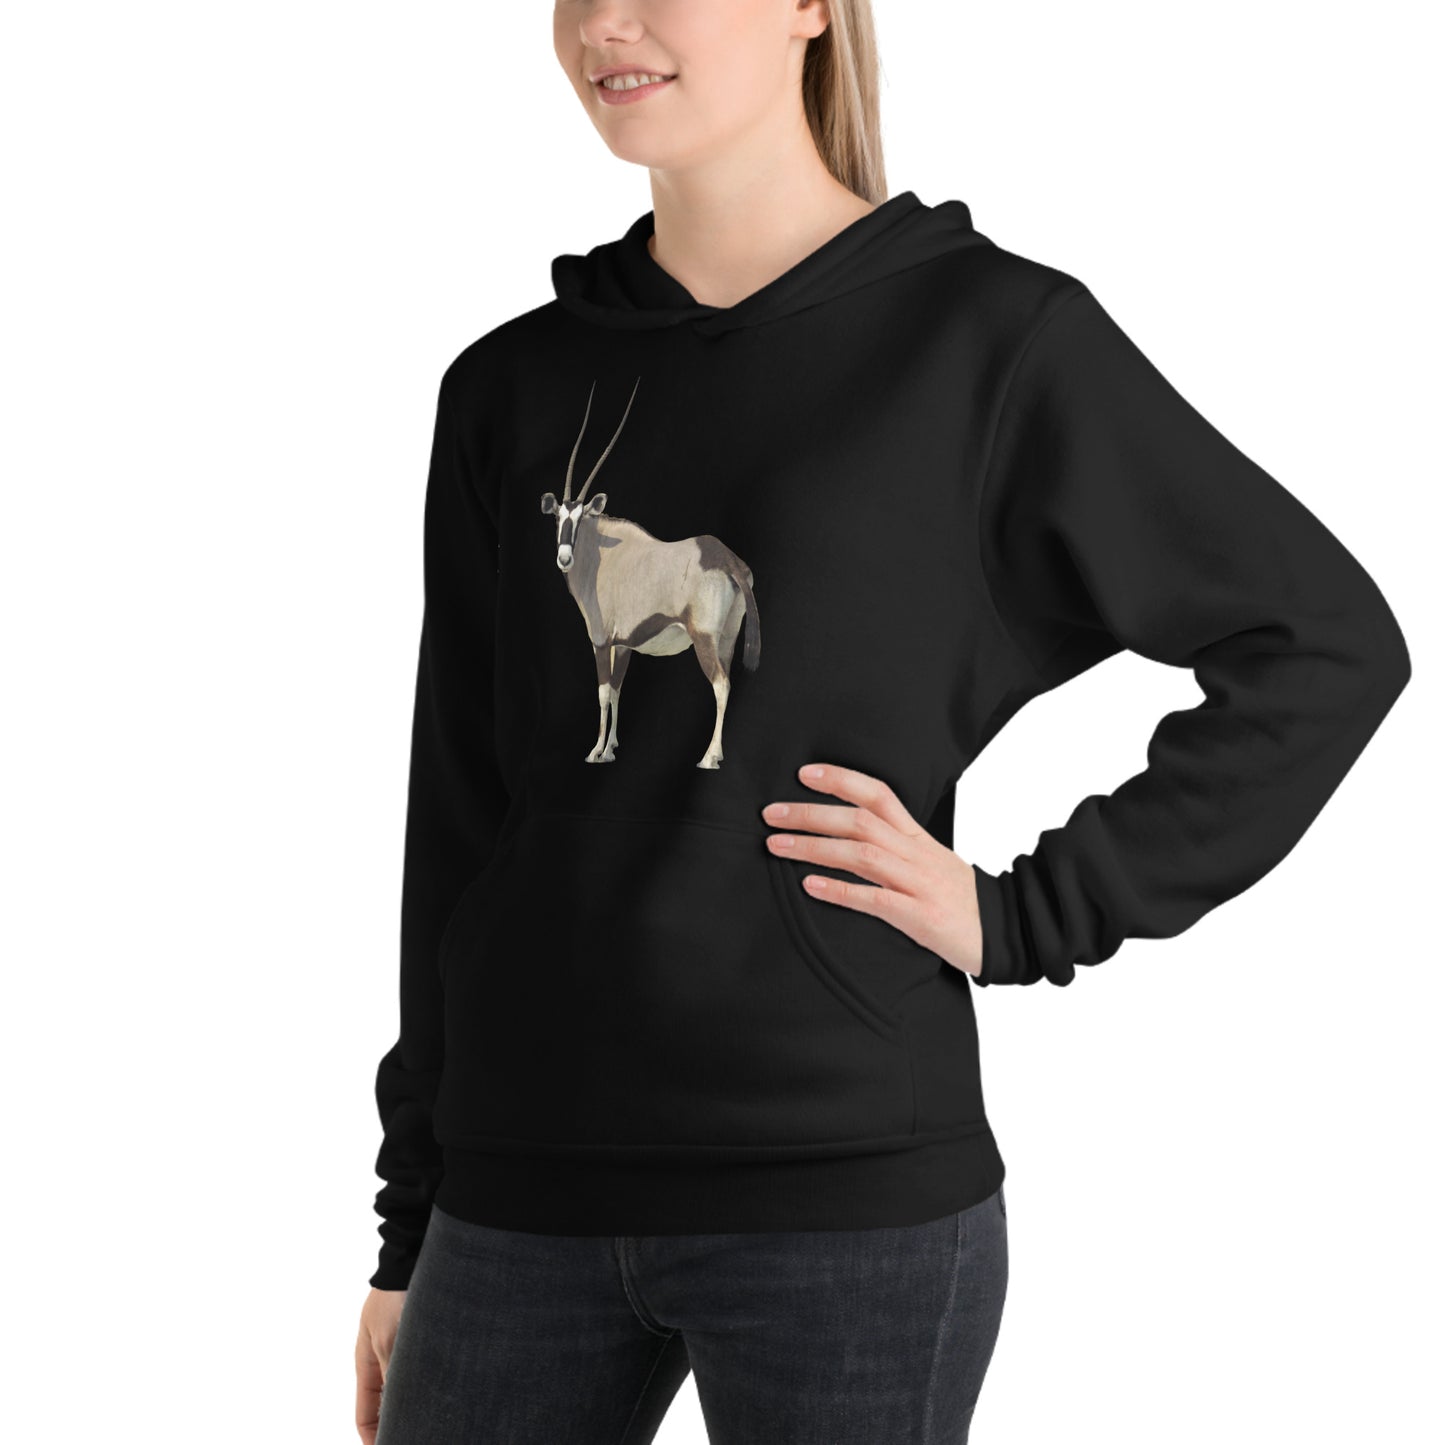 Men and Womens (Unisex) Hoodie Printed with an Oryx.